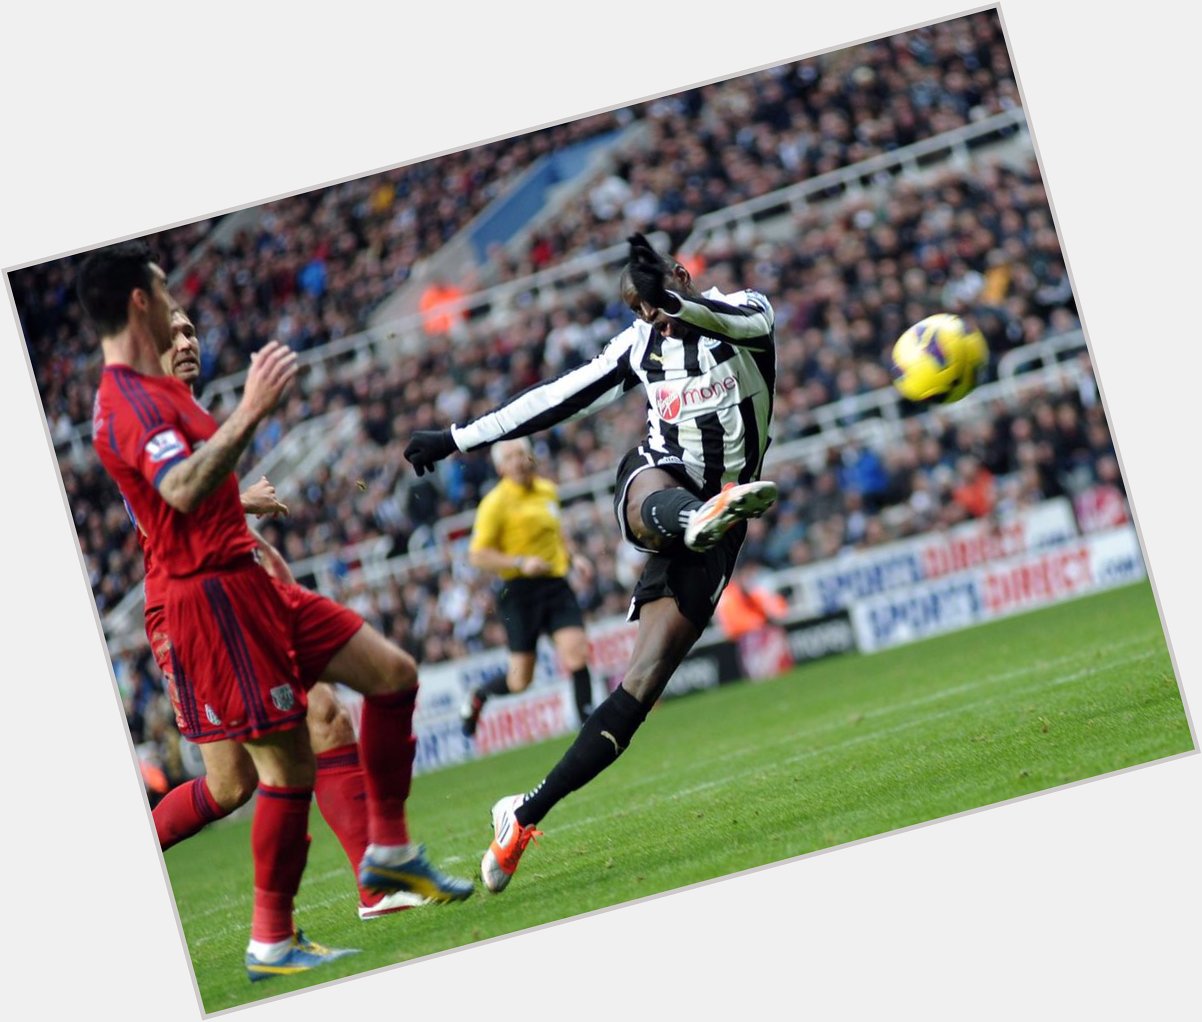   Happy Birthday Demba Ba

Unbelievable striker at Newcastle United. Left too early  